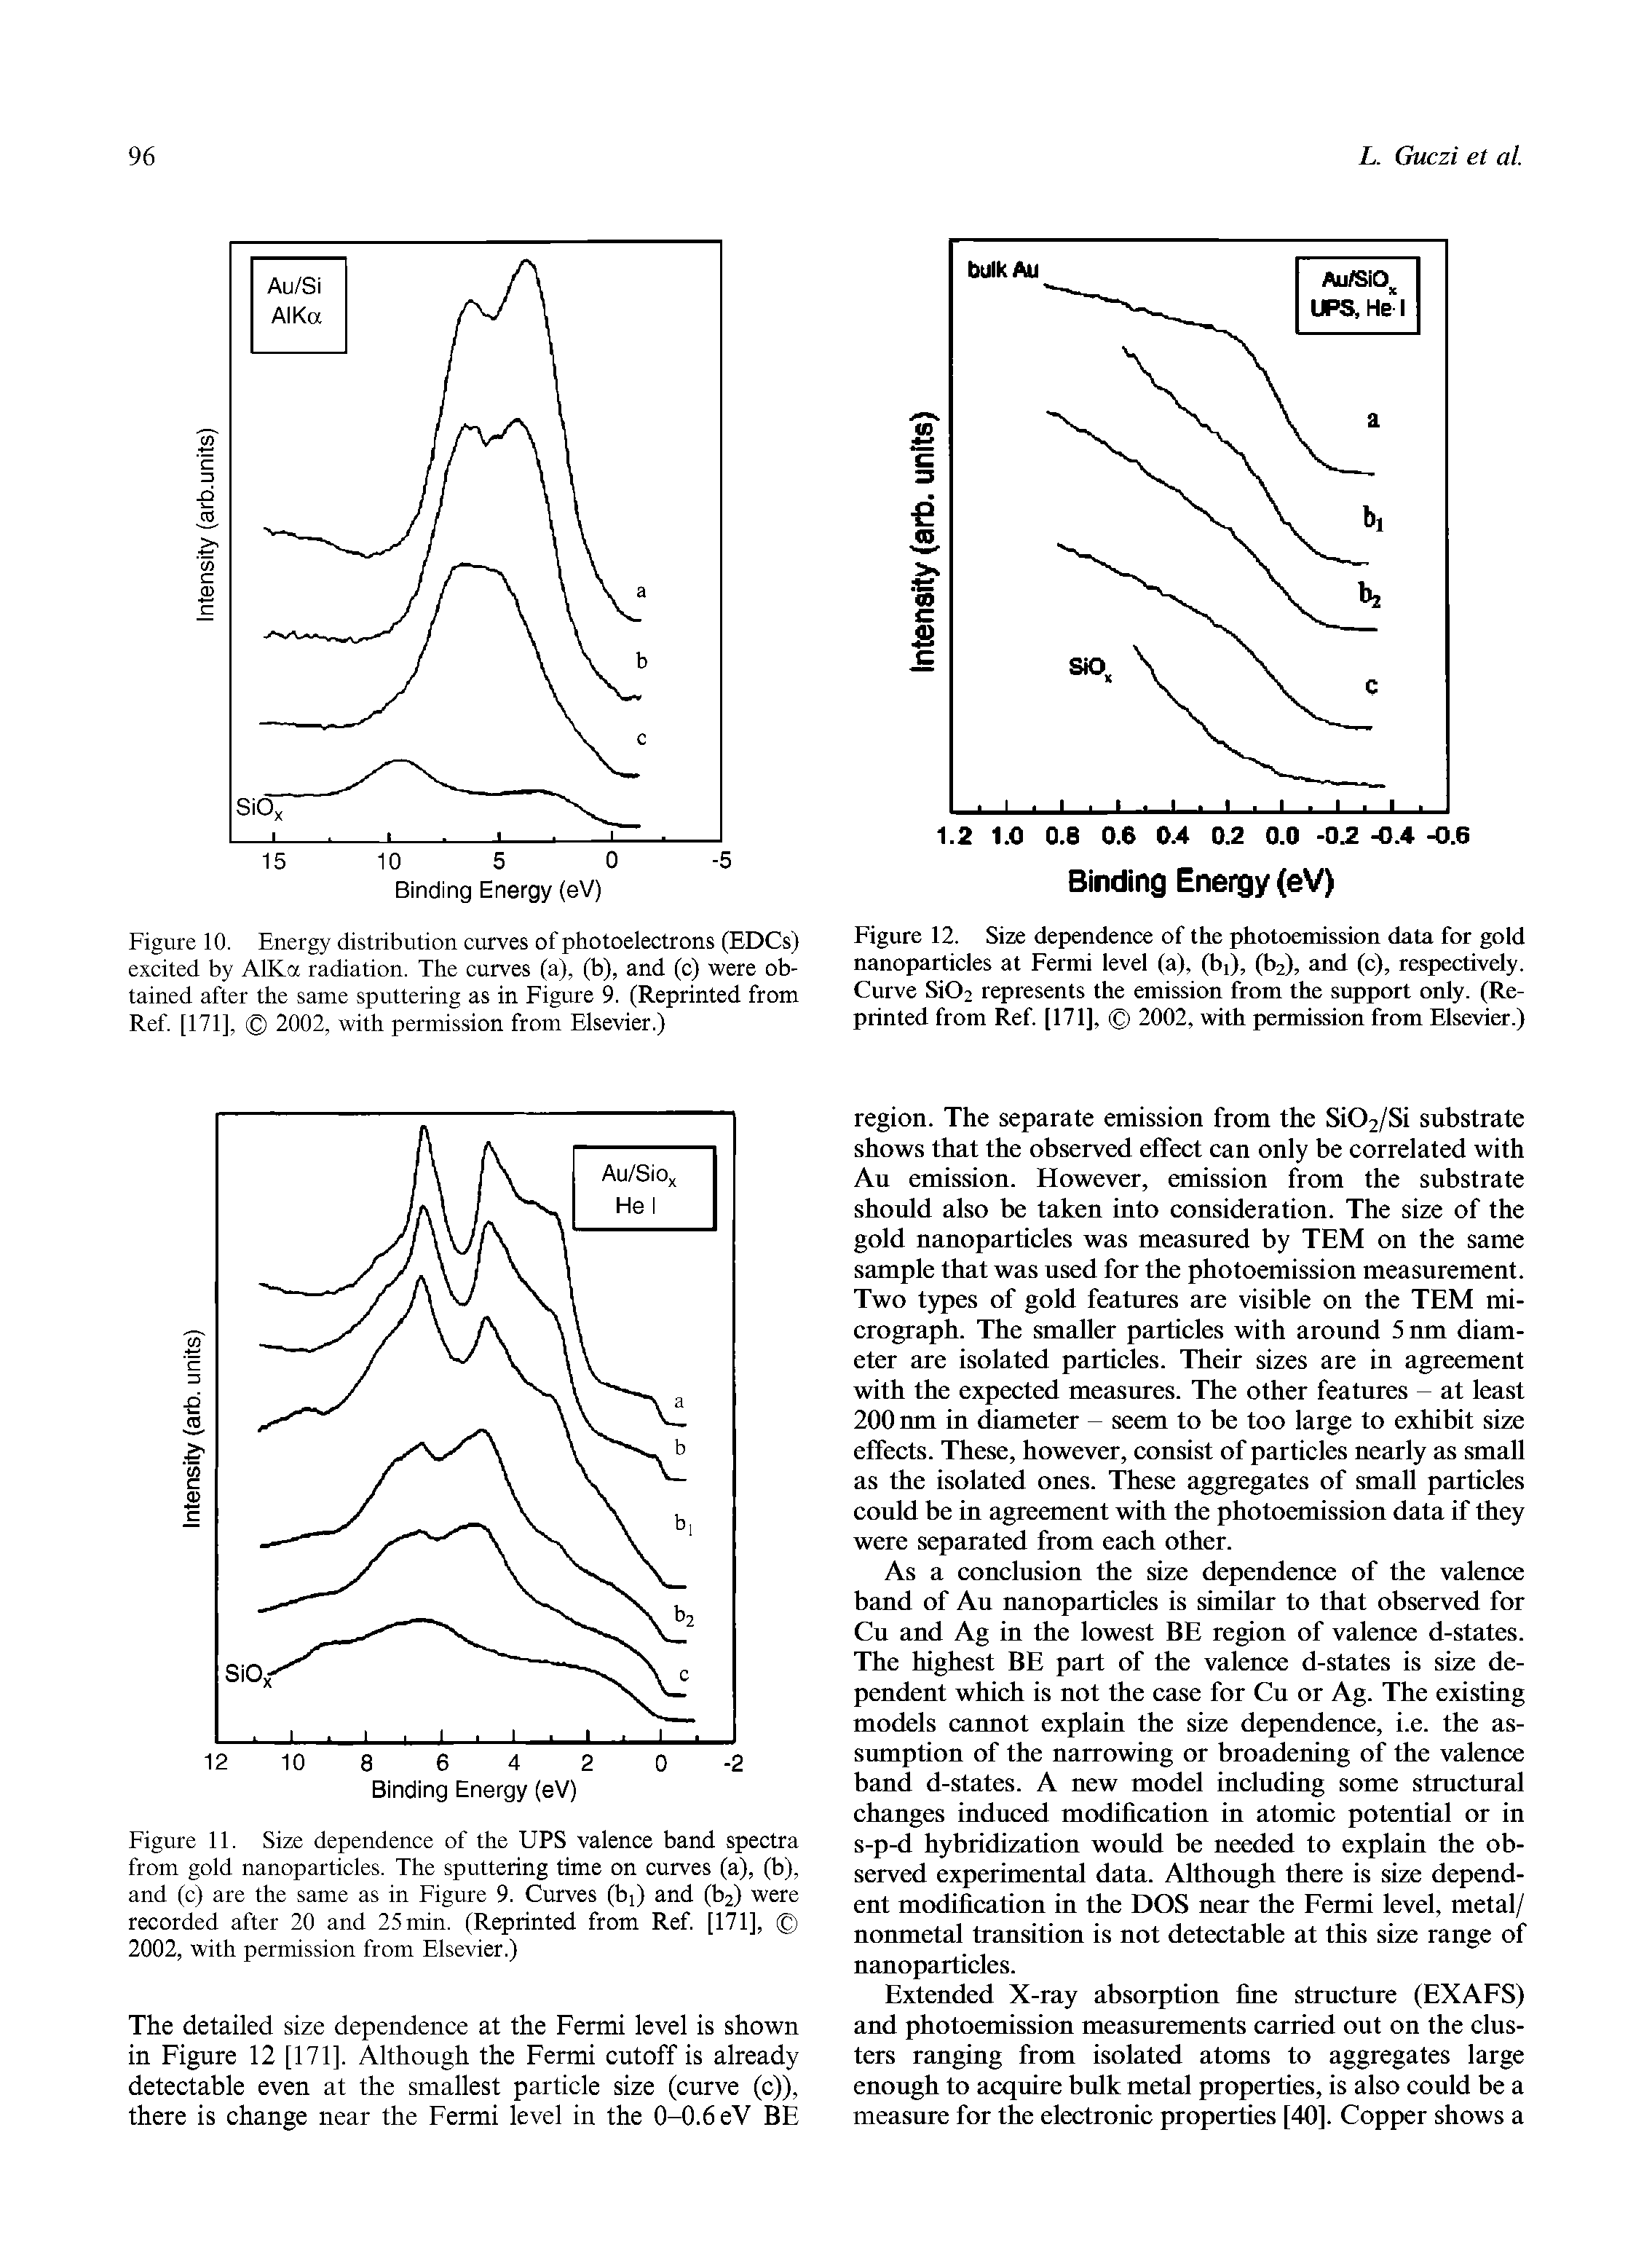 Figure 12. Size dependence of the photoemission data for gold nanoparticles at Fermi level (a), (bi), (62), and (c), respectively. Curve Si02 represents the emission from the support only. (Reprinted from Ref. [171], 2002, with permission from Elsevier.)...